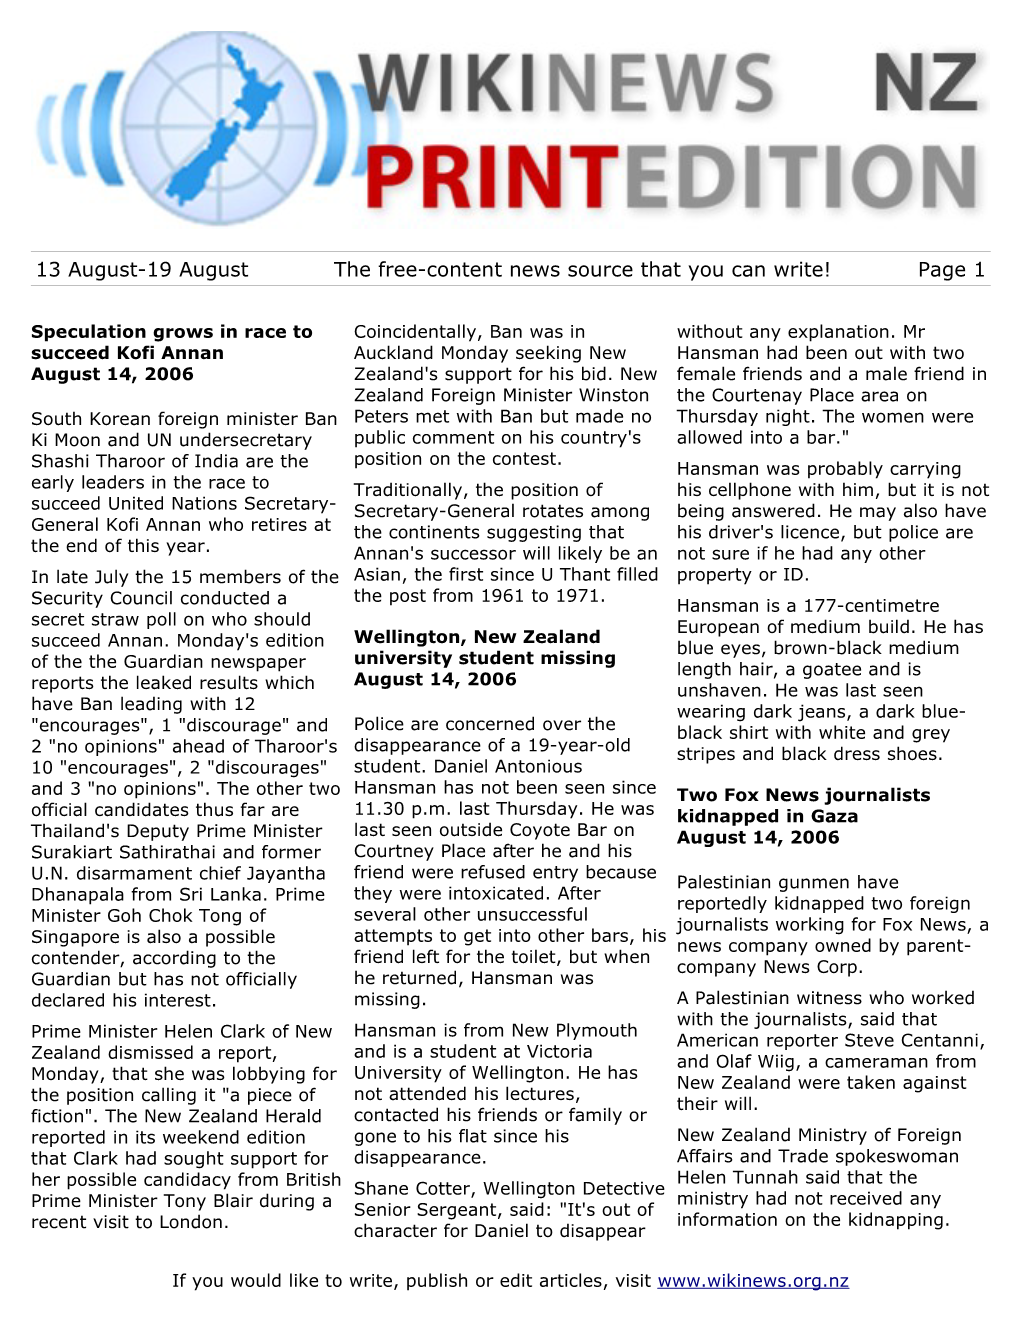 13 August-19 August the Free-Content News Source That You Can Write! Page 1